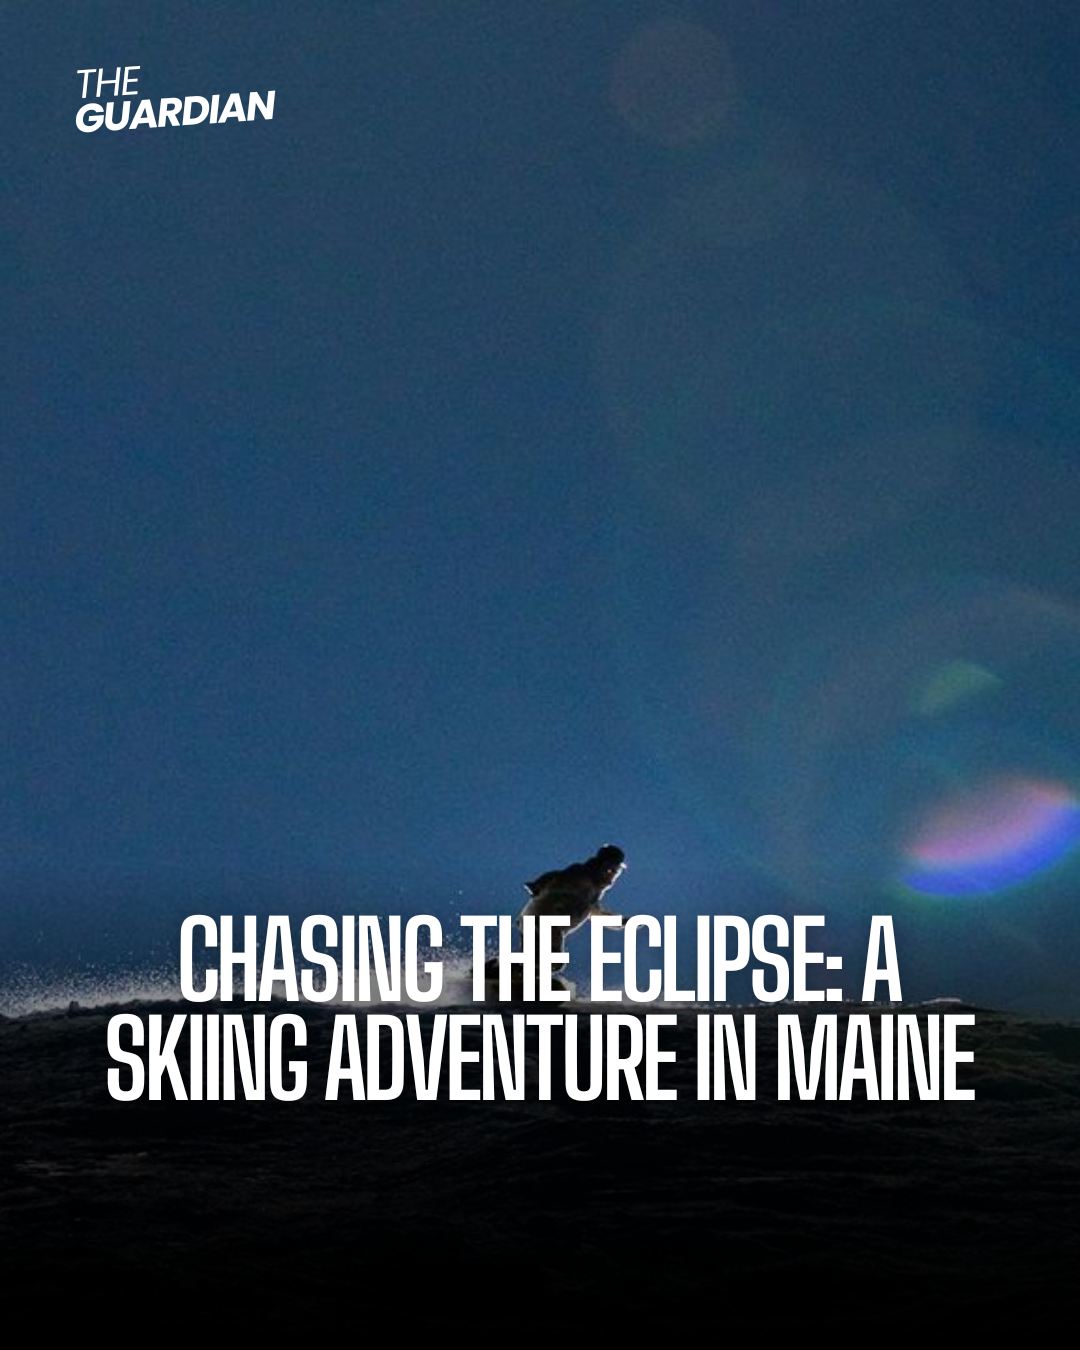 Chasing the eclipse: a skiing adventure in Maine - USA Guardian